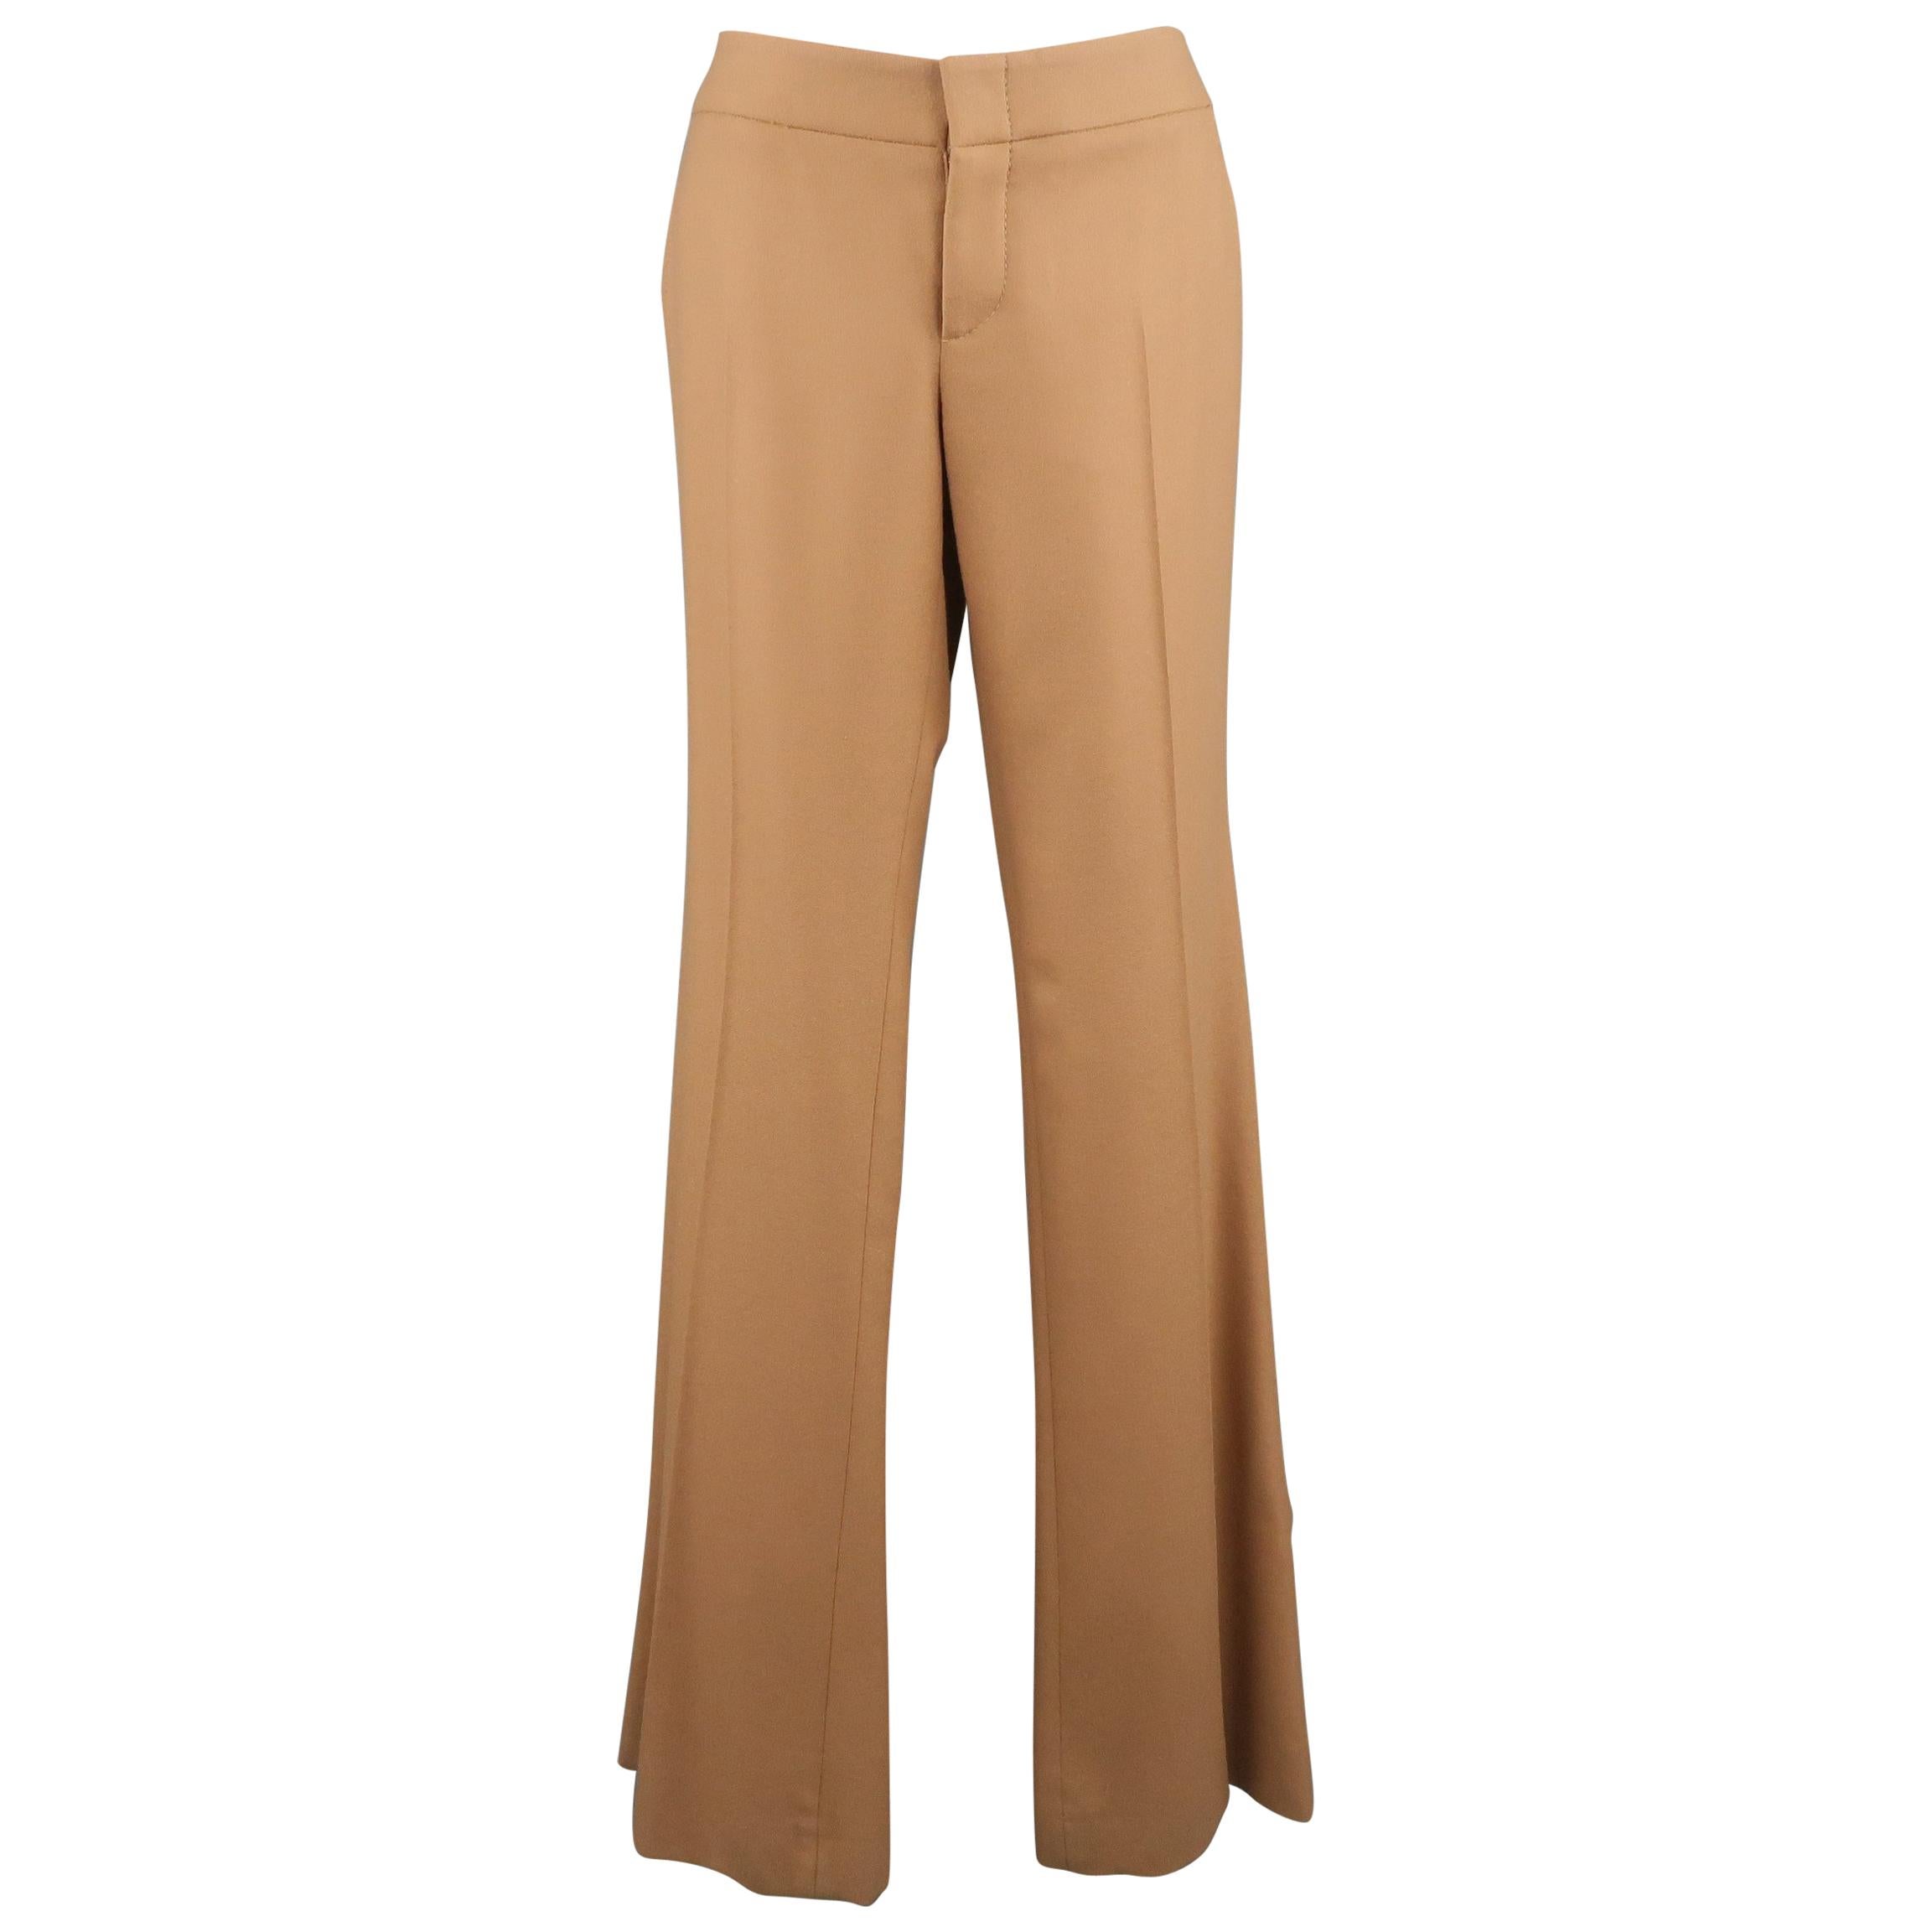 GUCCI Size 6 Camel Wool / Cashmere Flared Dress Pants